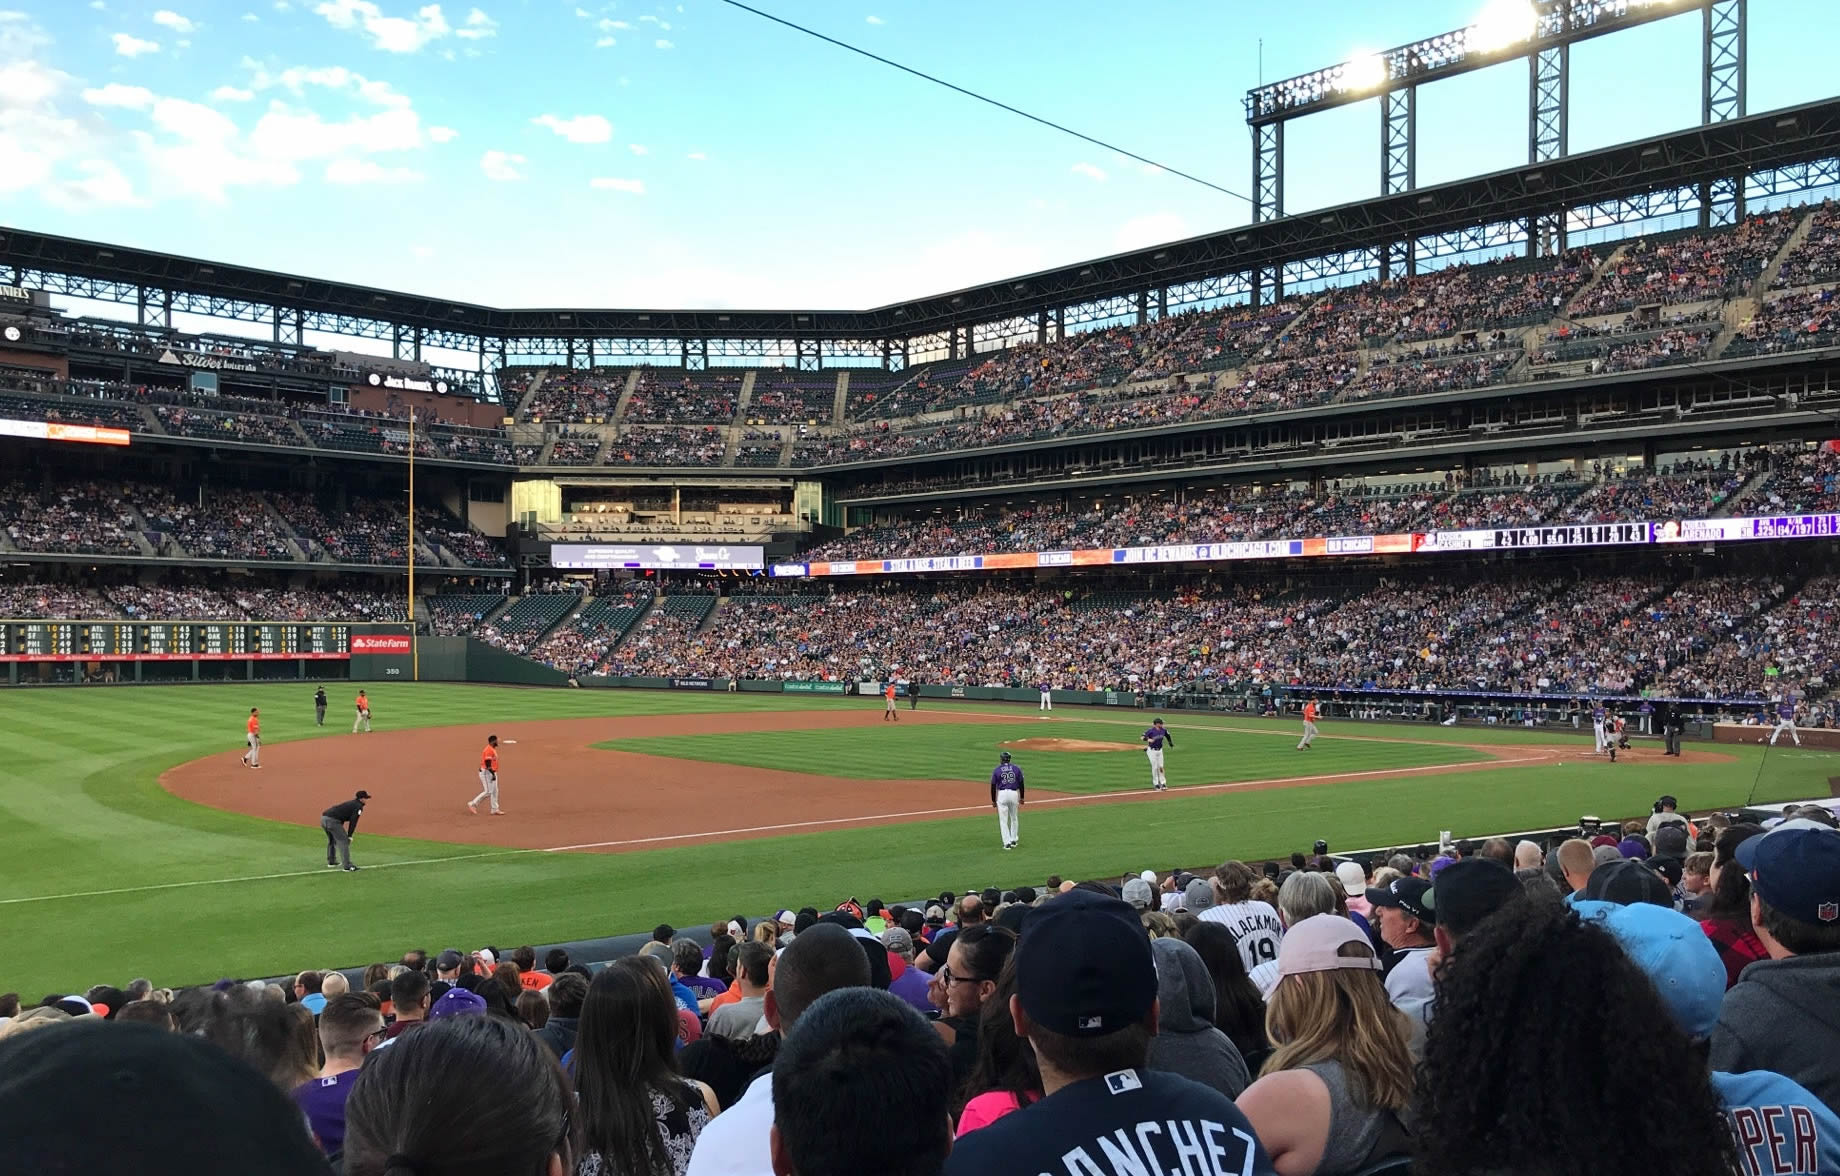 section 142, row 23 seat view  - coors field